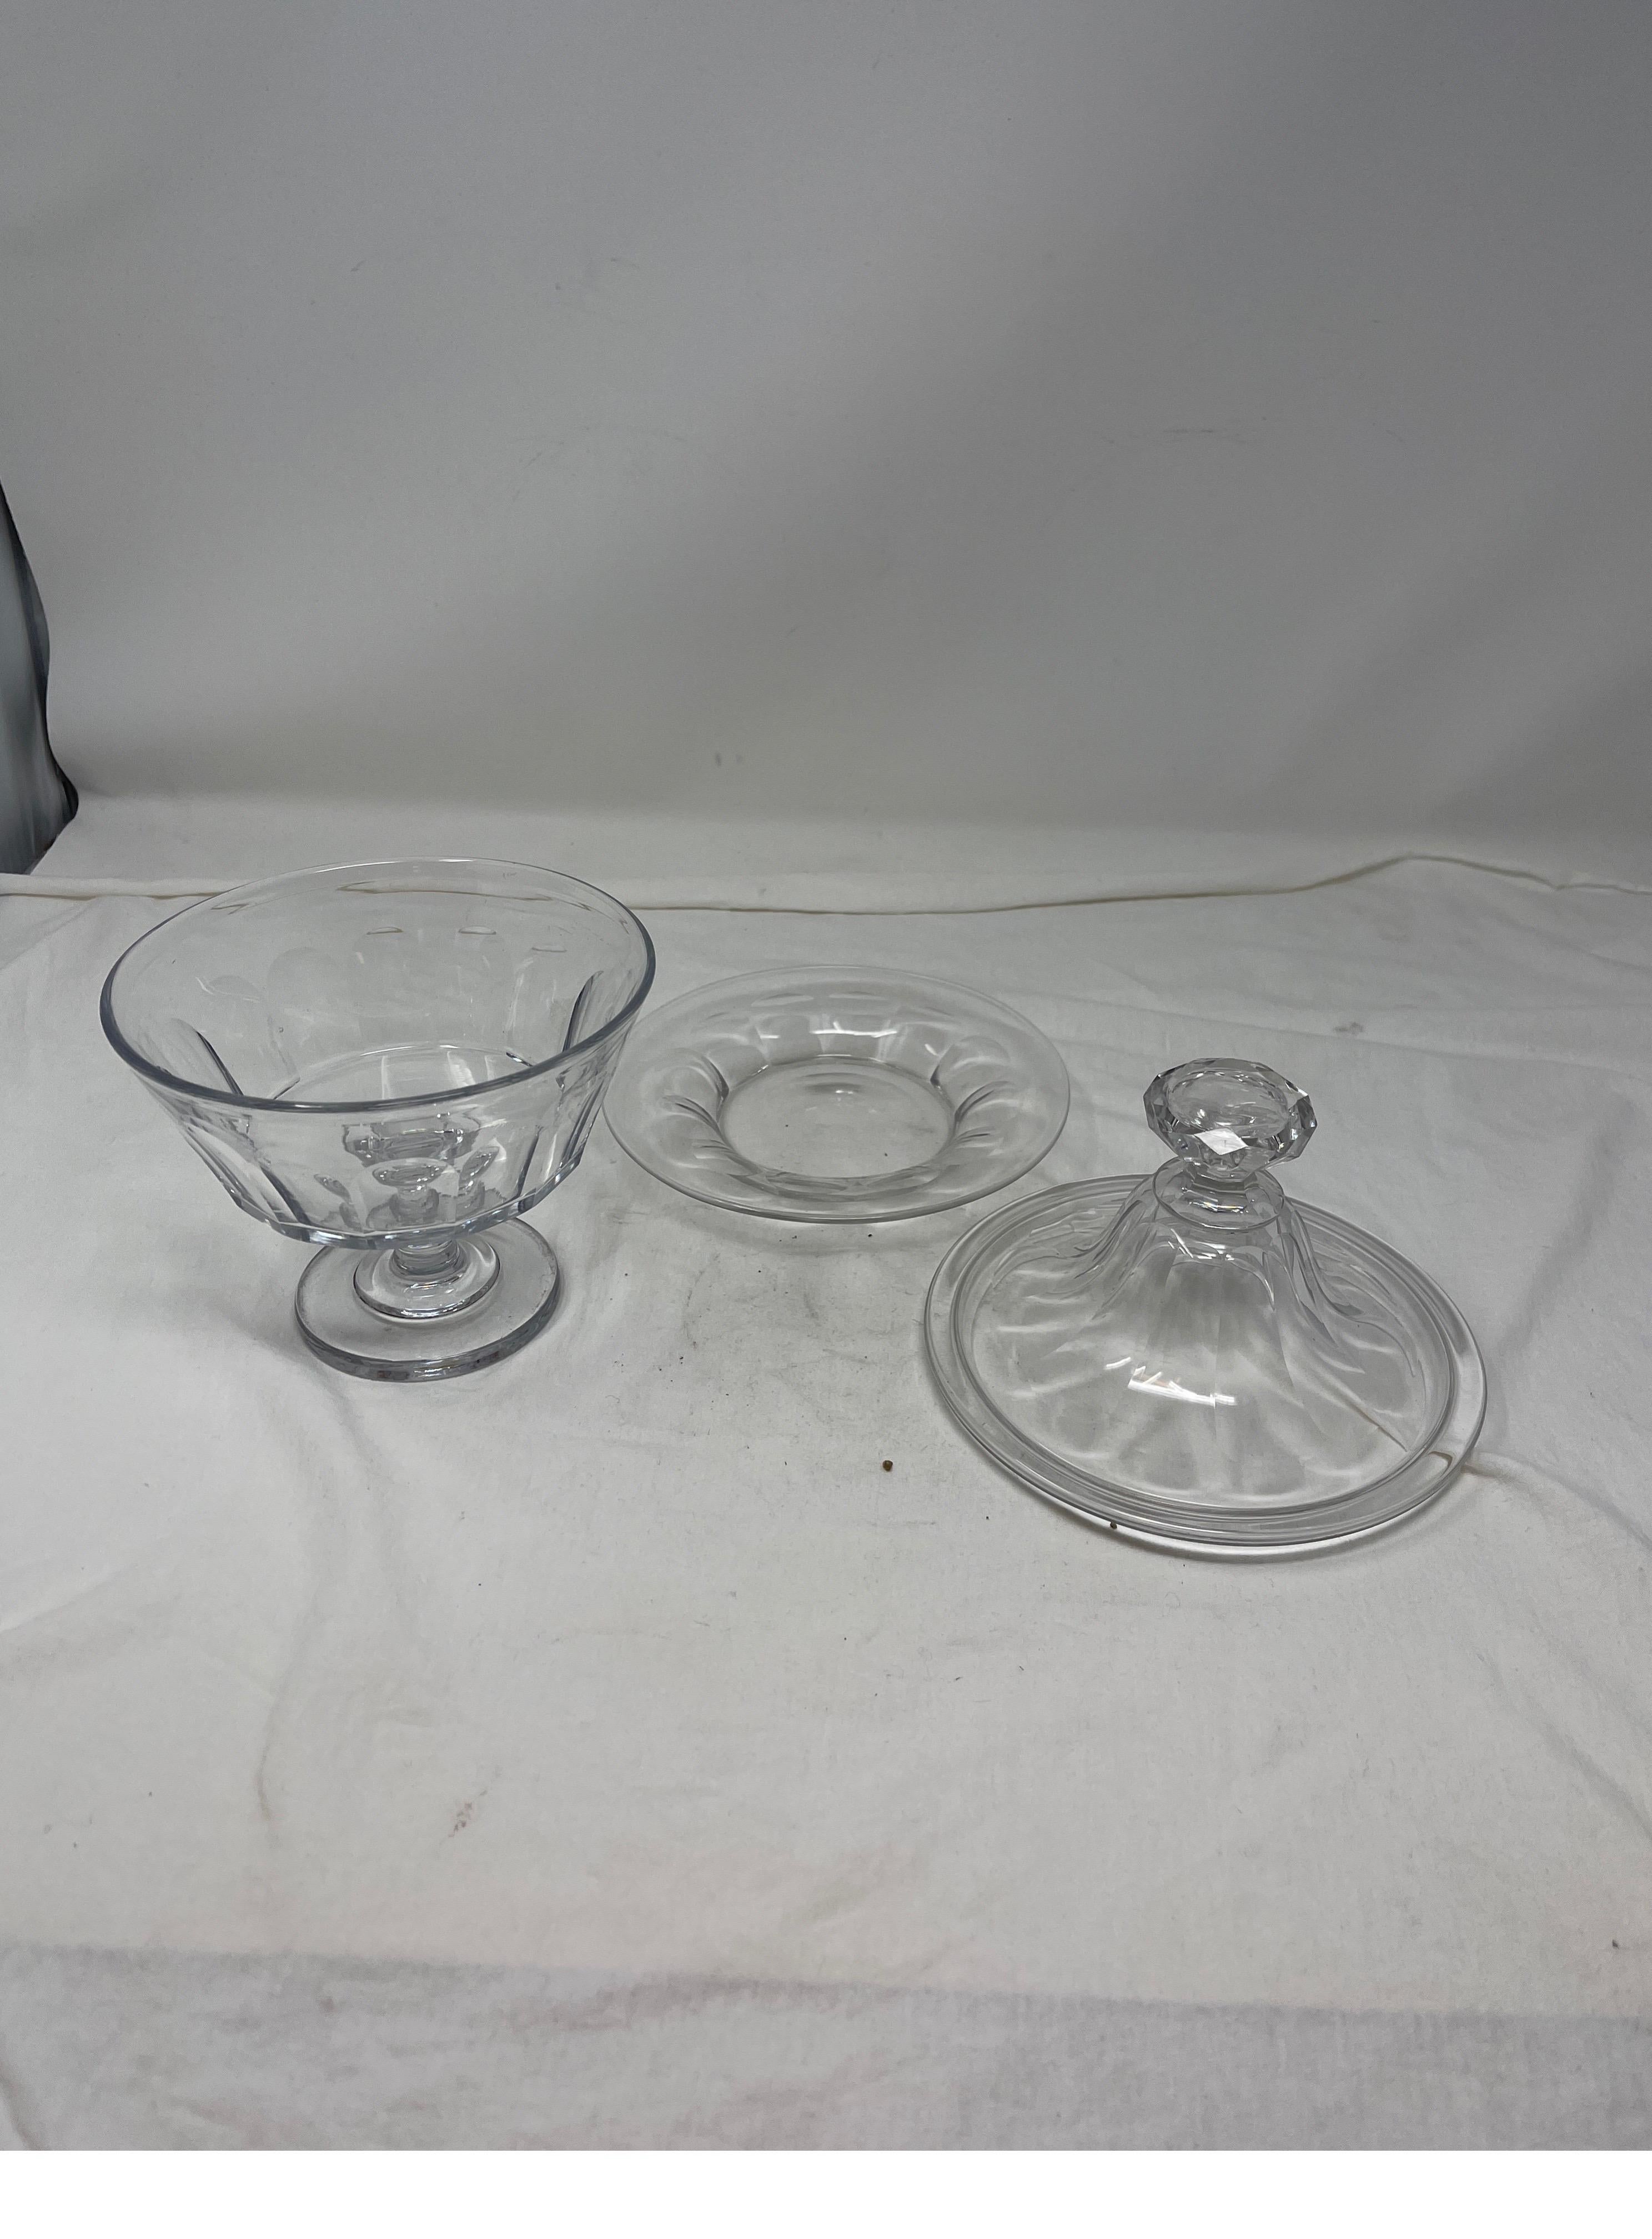 Timeless French glass candy jar that includes a petite plate. This fluted and faceted candy jar works to present your most delicious candy or can serve as a cotton ball holder for your vanity.

3 pieces. Plate, jar, and lid. 
Measures: 8” H x 6